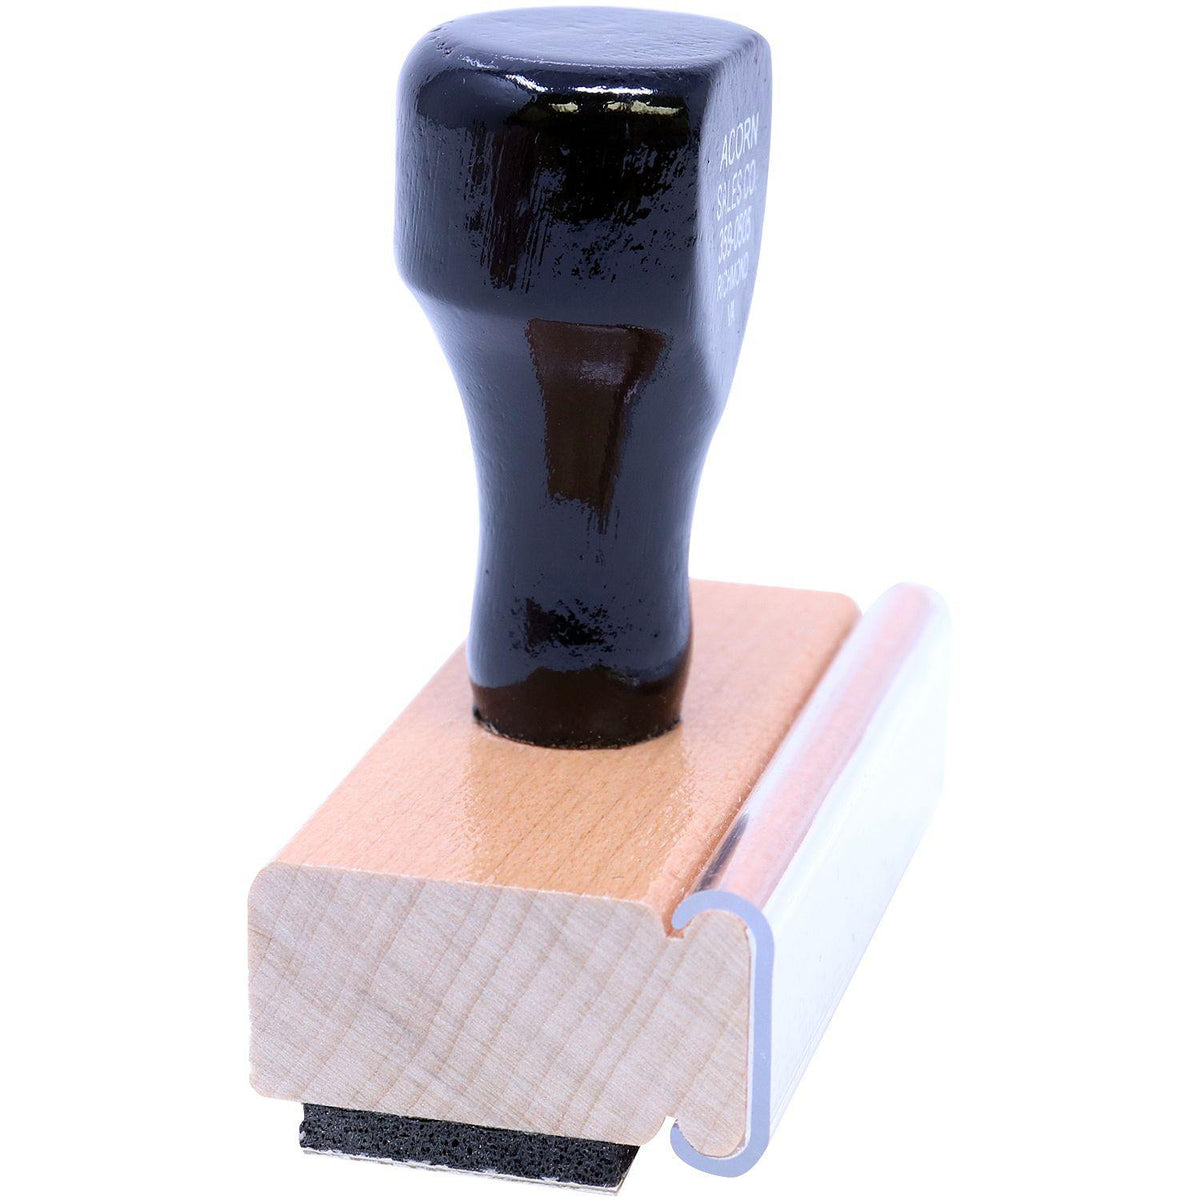 Paid with Checkmark Rubber Stamp - Engineer Seal Stamps - Brand_Acorn, Impression Size_Small, Stamp Type_Regular Stamp, Type of Use_Business, Type of Use_Finance